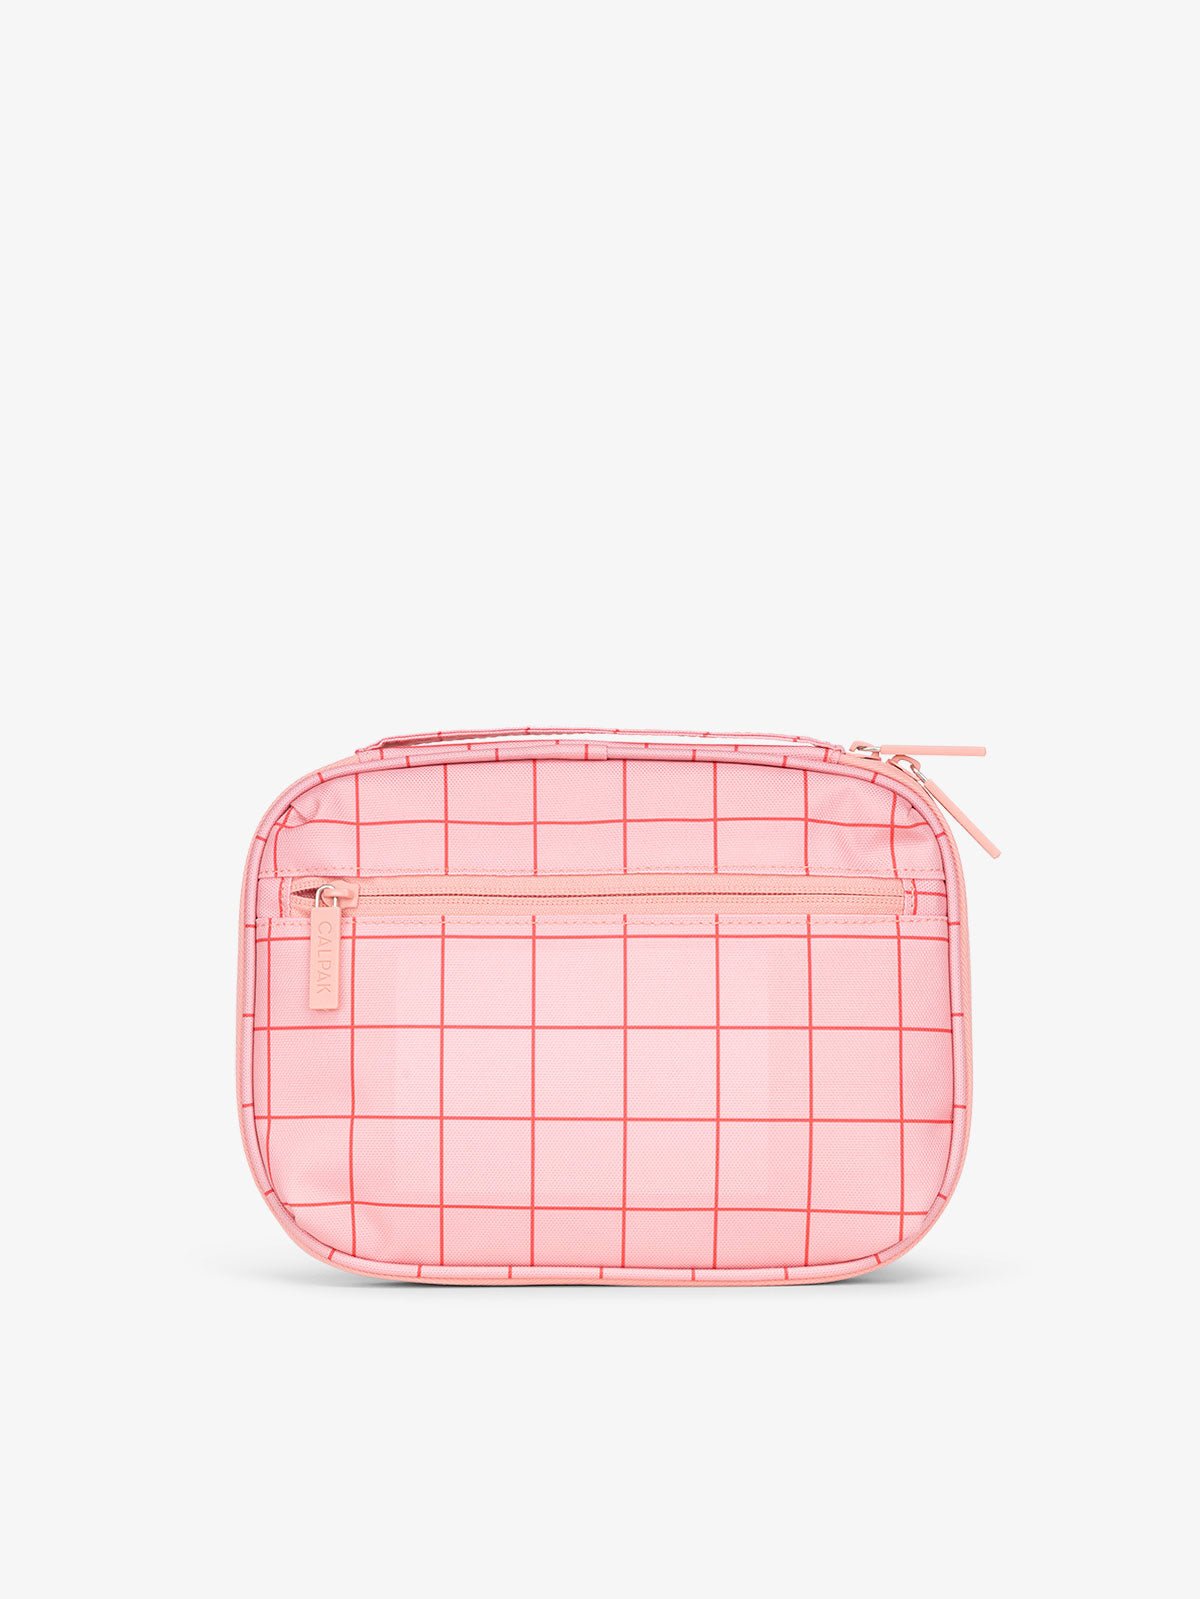 CALPAK tech and cables organizer bag in pink grid